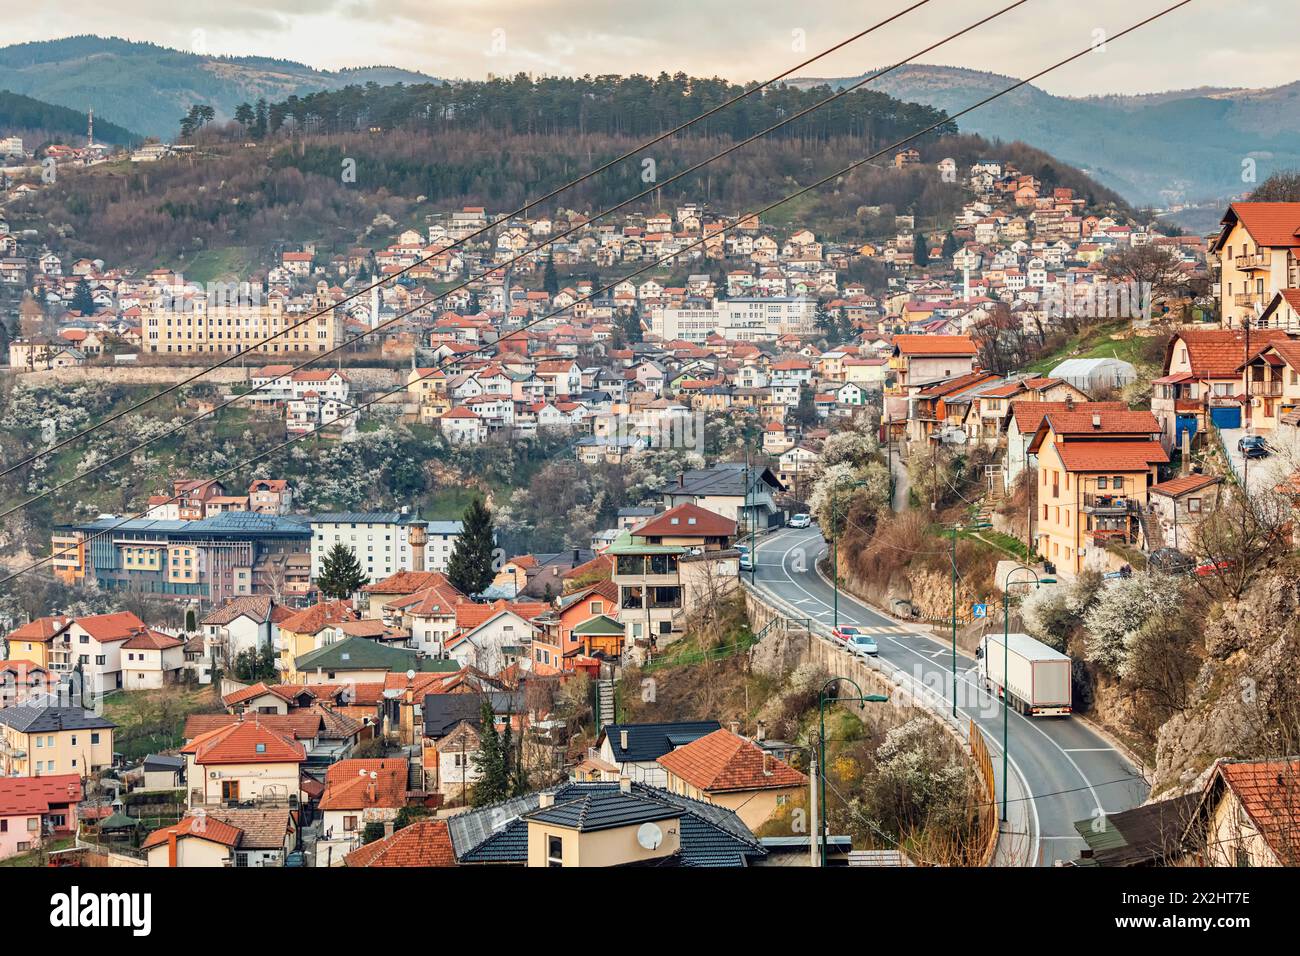 At sunset, Sarajevo's cityscape unfolds, with winding roads weaving through colorful neighborhoods against the backdrop of majestic mountains. Stock Photo